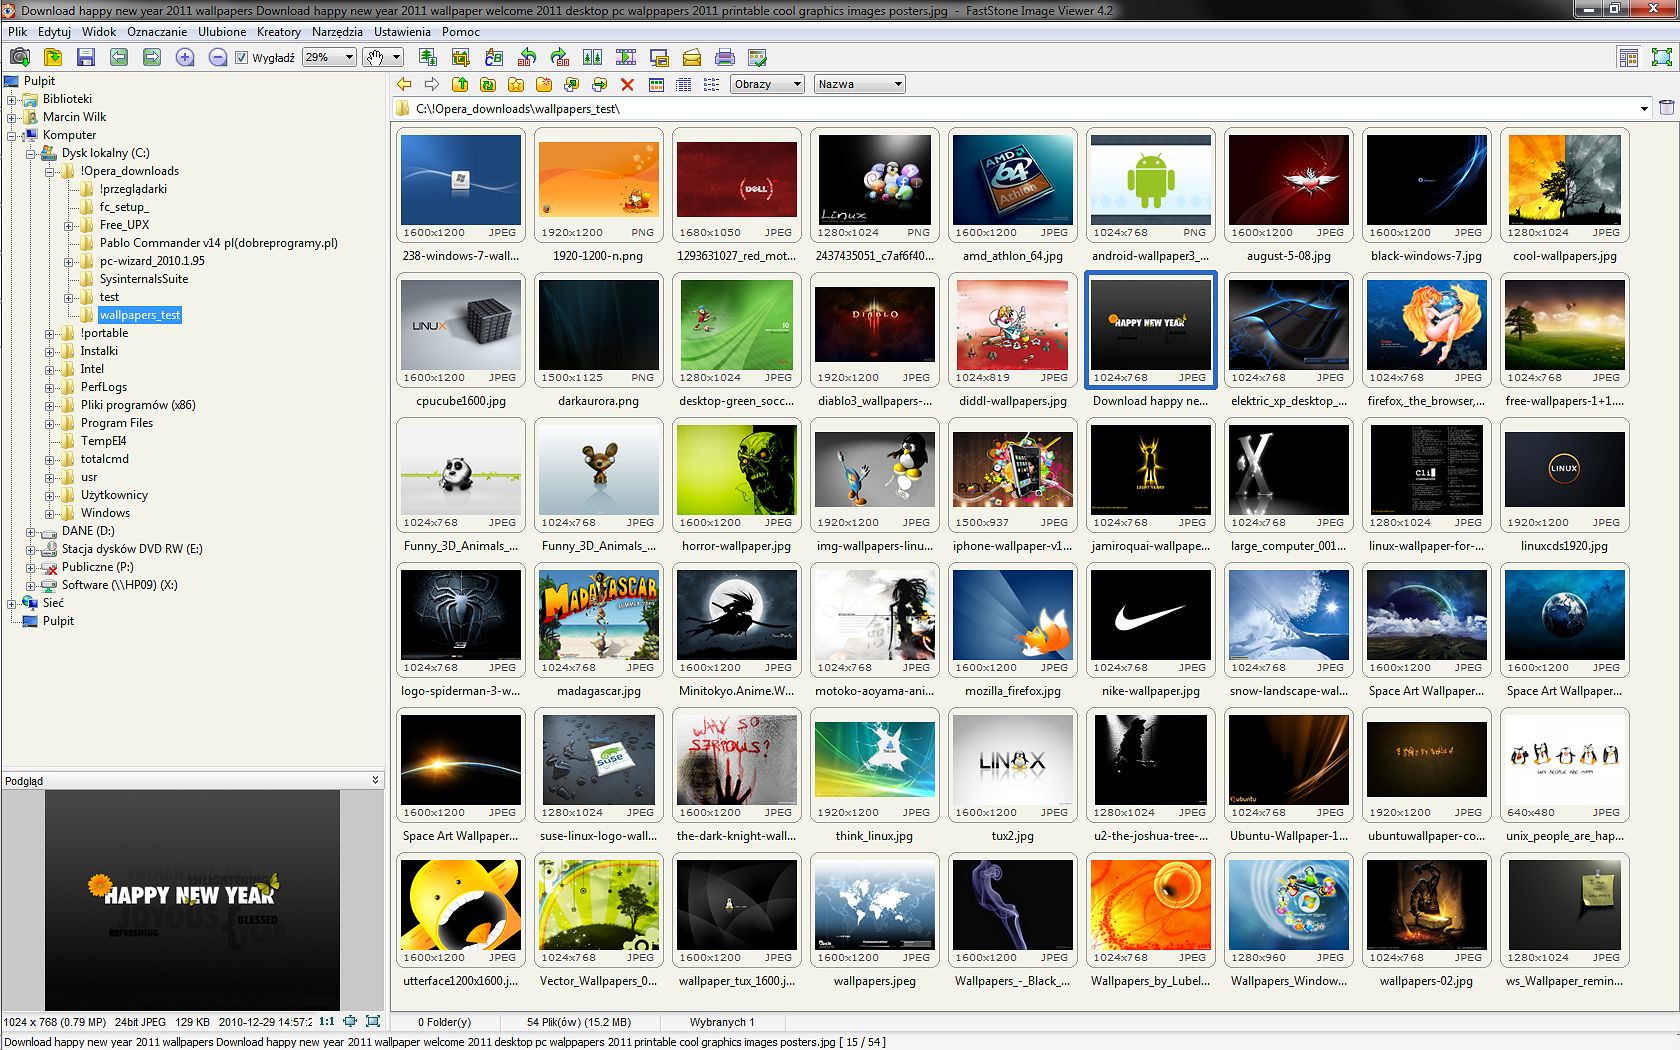 FastStone Image Viewer 7.8 free downloads